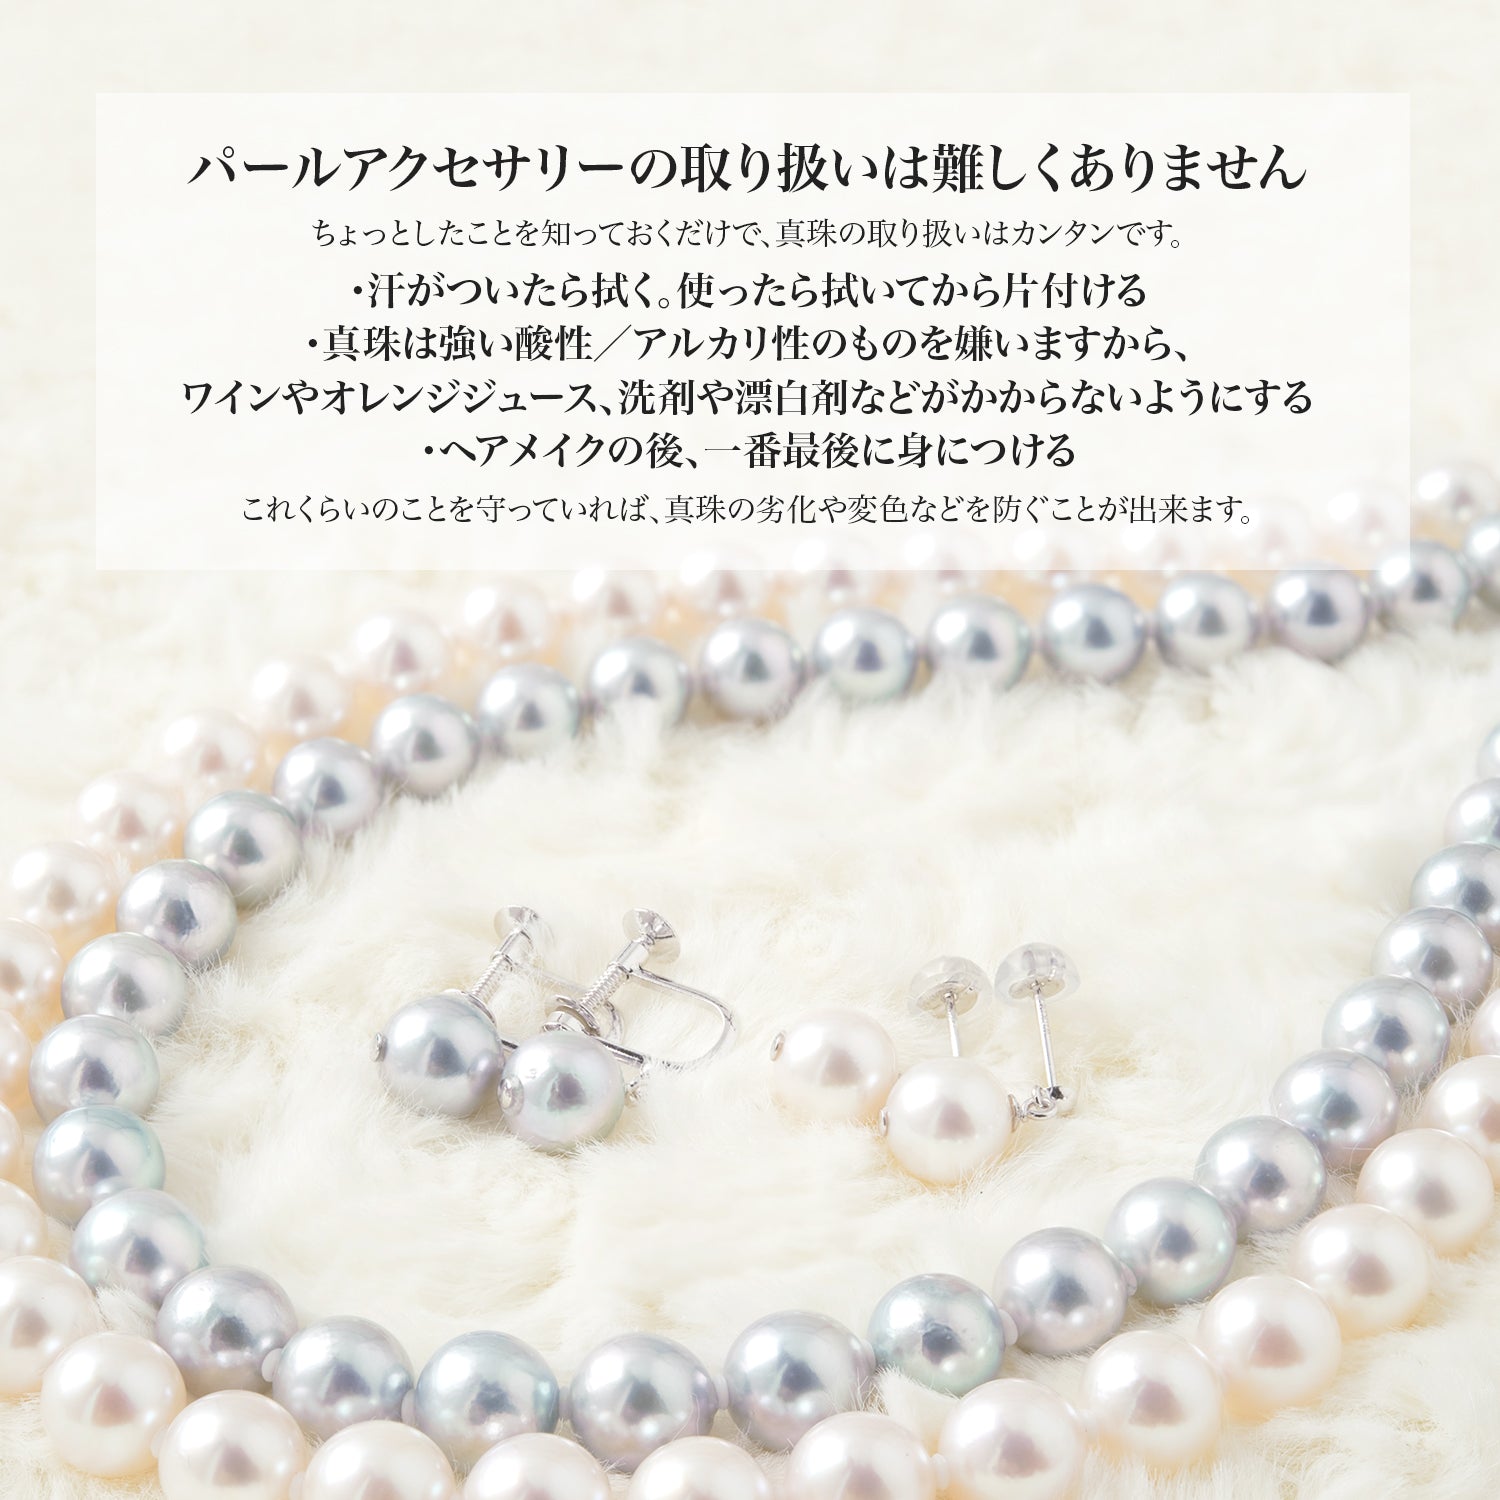 Akoya Pearl Vatican Pendant [7.0-7.5mm] Brass 《Silver/Gold》Pearl Necklace